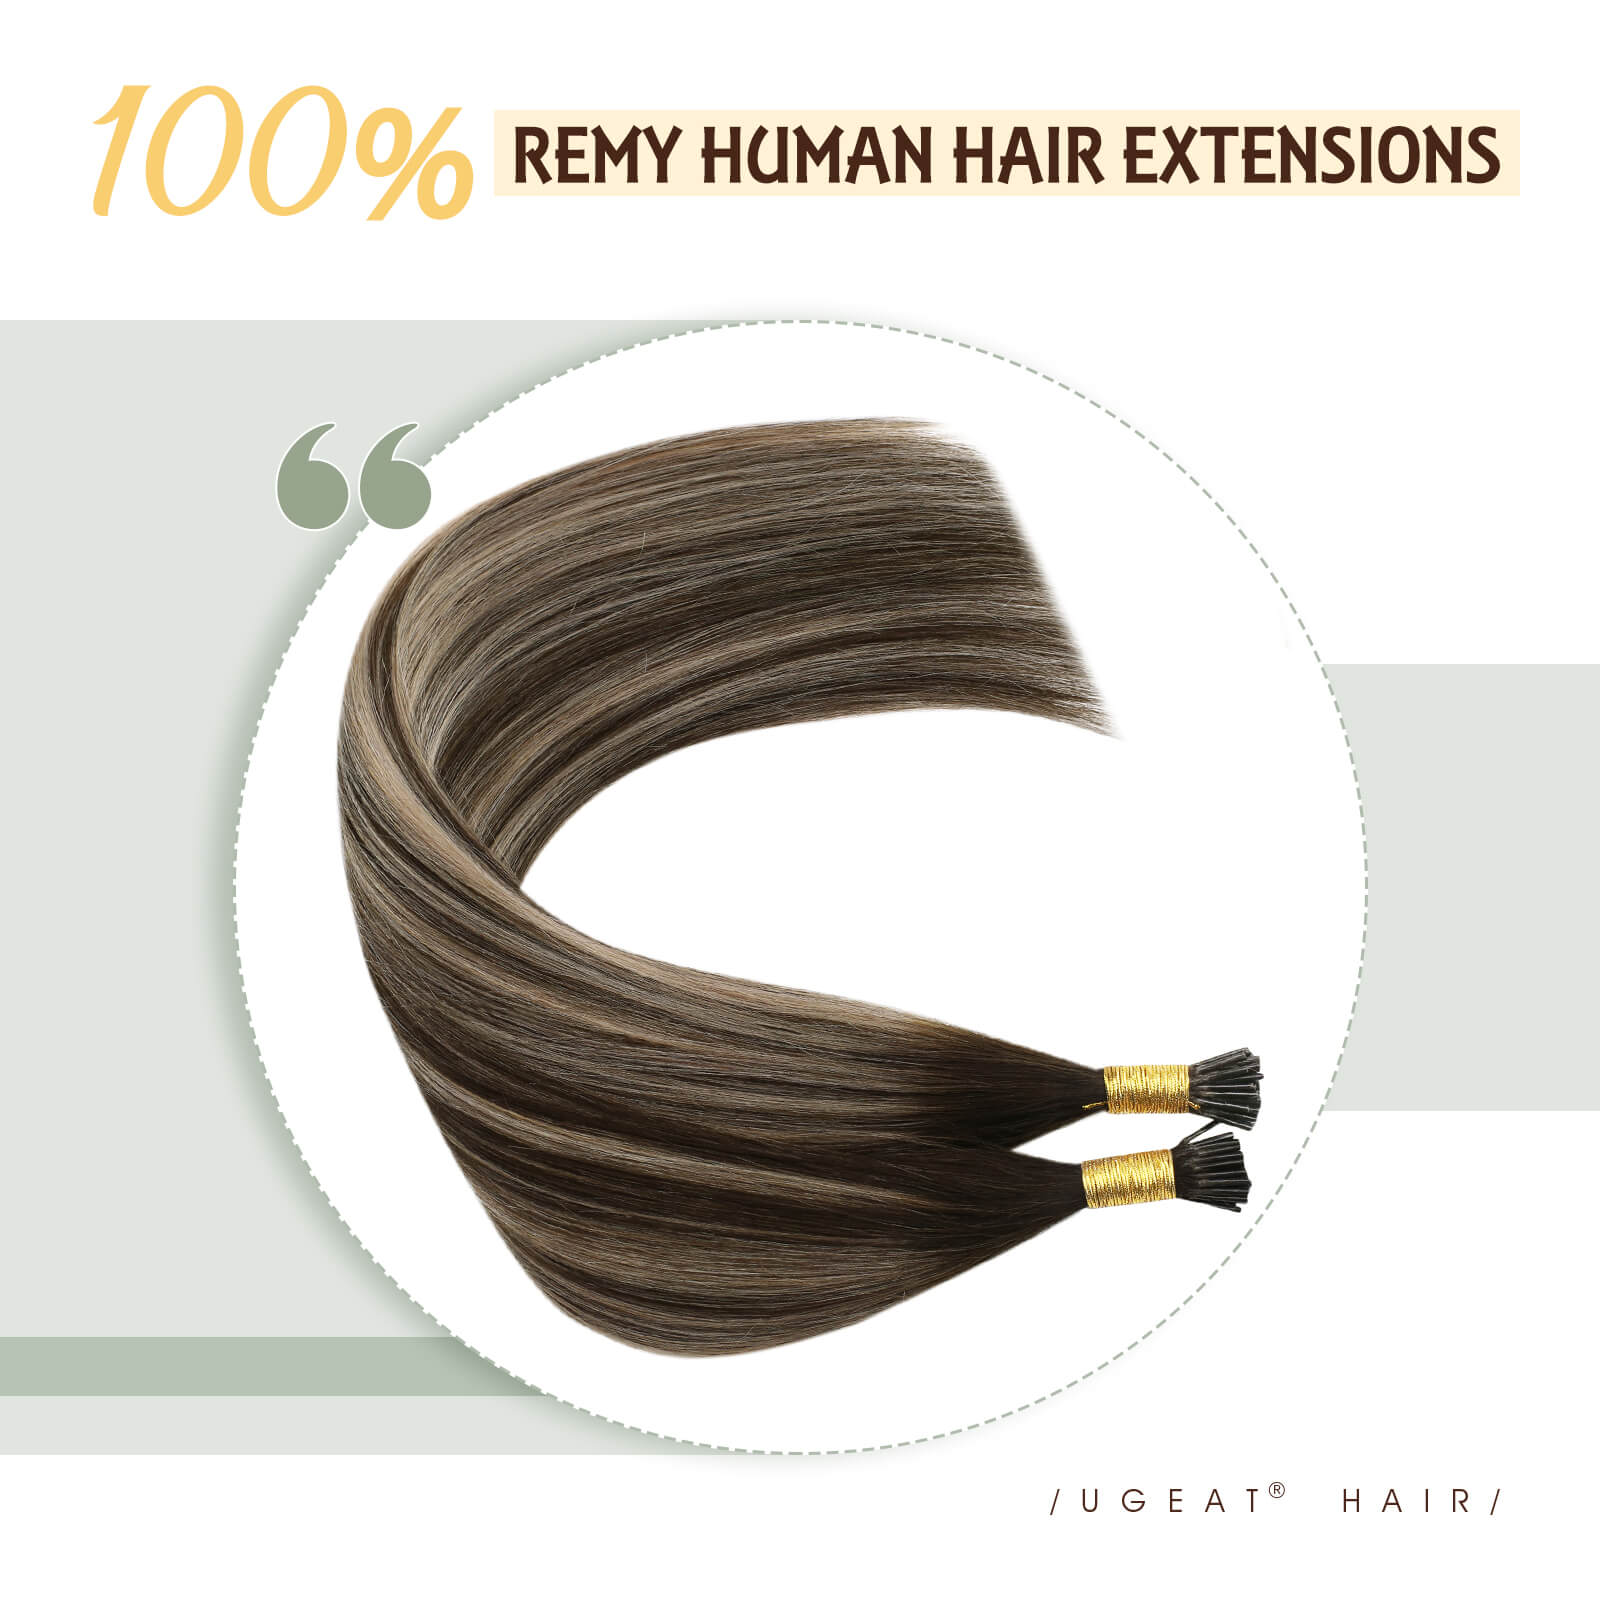 I tip Remy Human Hair Extensions Ombre Brown with Blonde Color